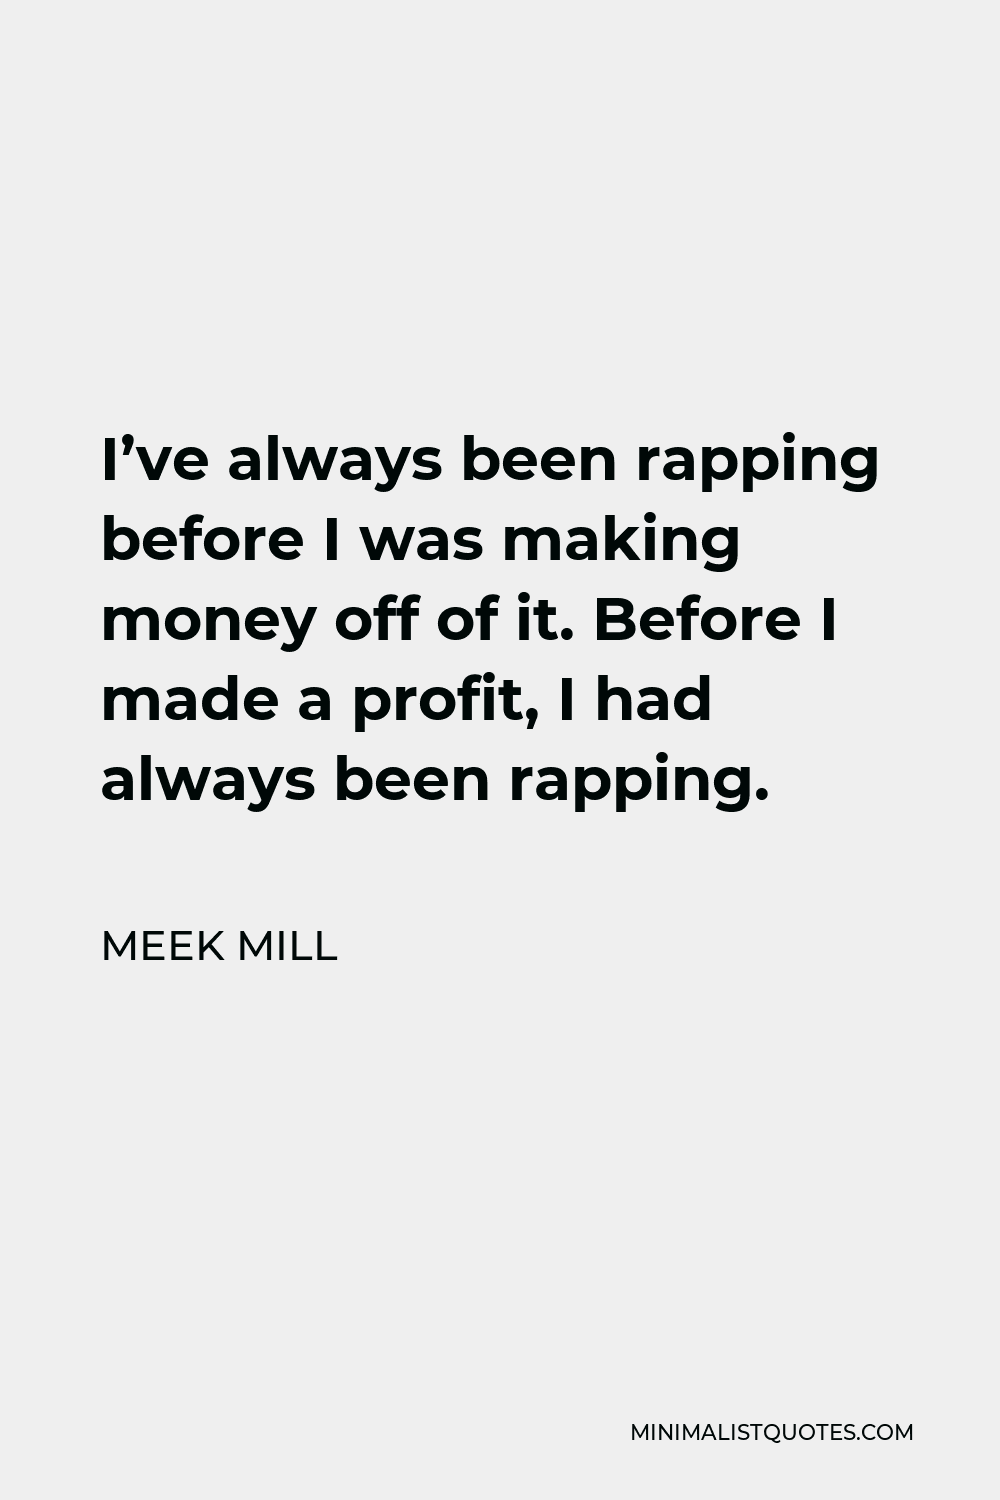 Meek Mill Quote - I’ve always been rapping before I was making money off of it. Before I made a profit, I had always been rapping.